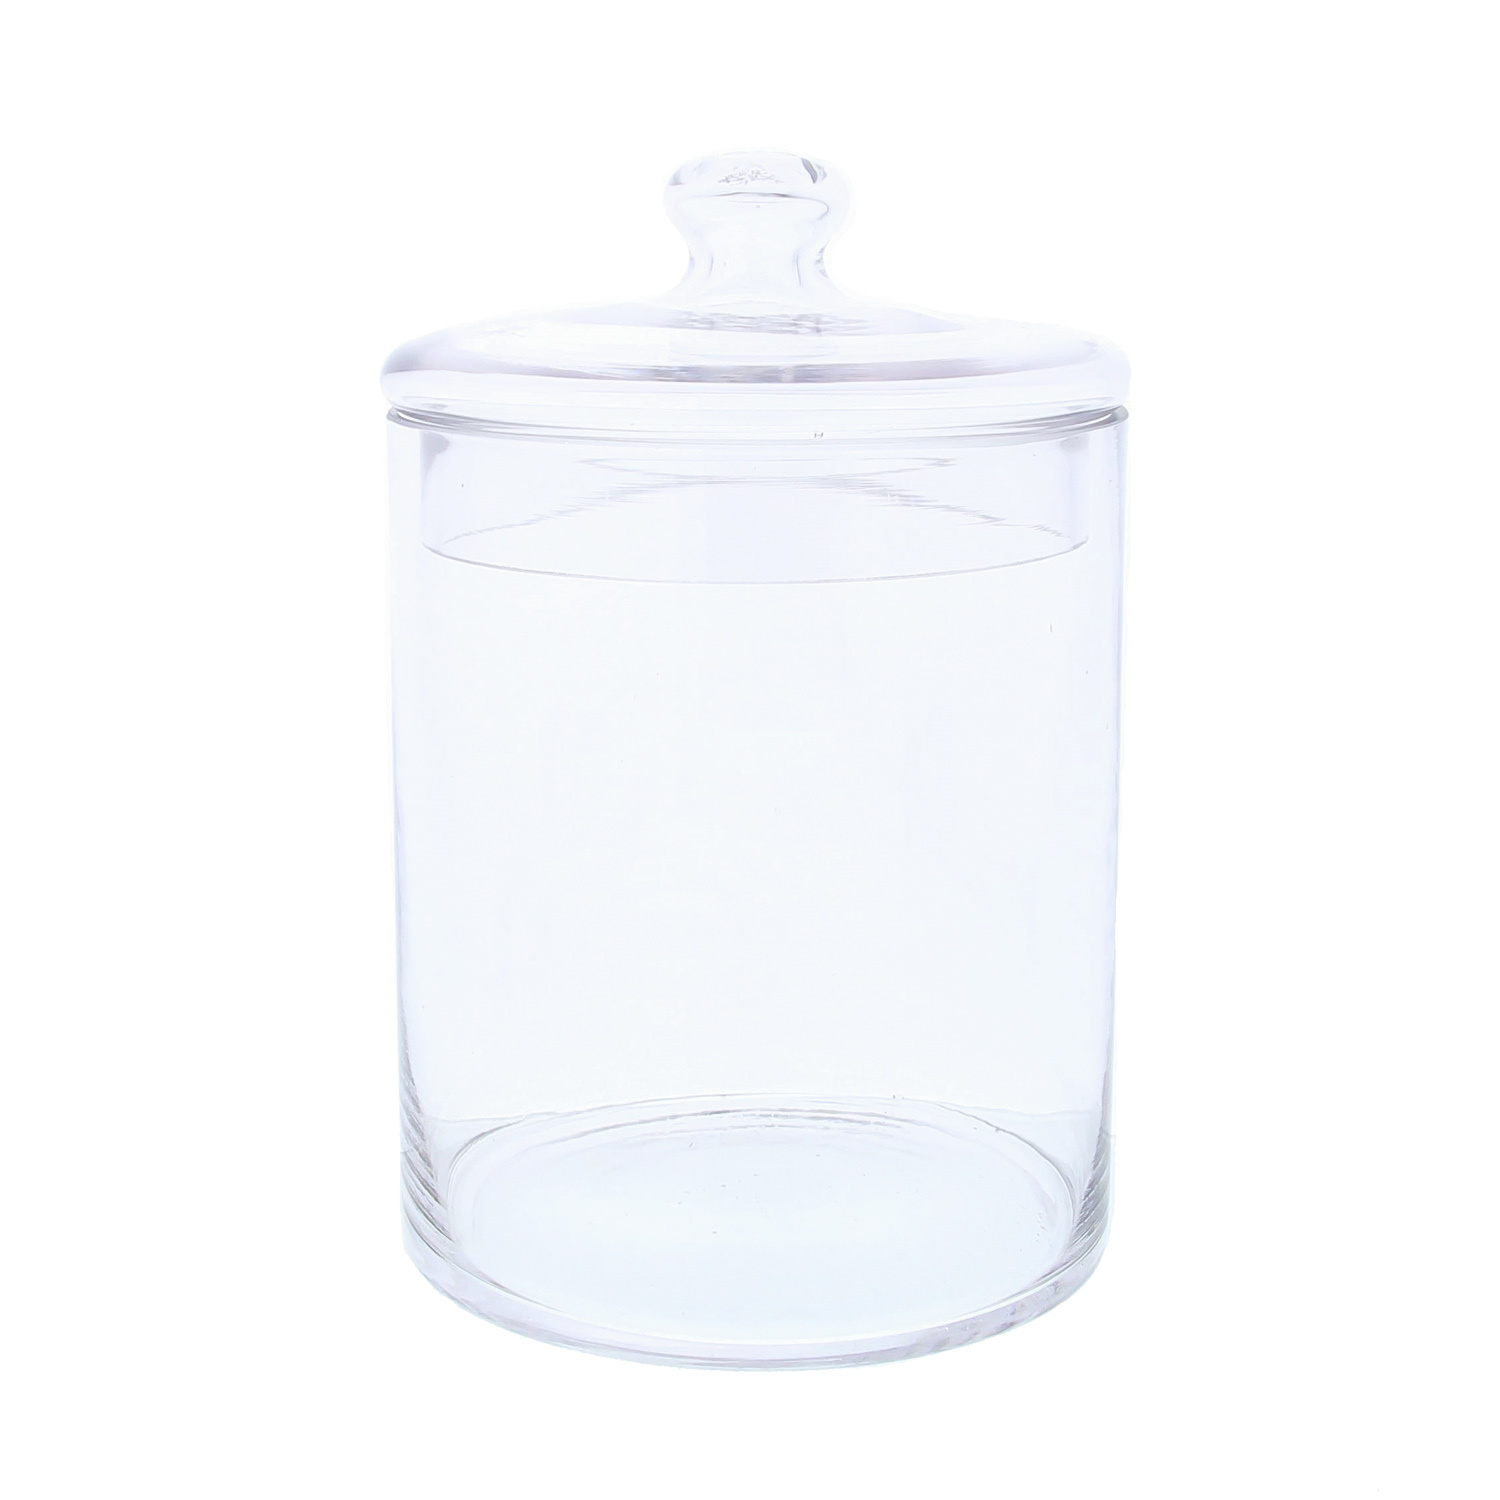 Glass candy jar with lid - 150*223*150mm - 2 pieces